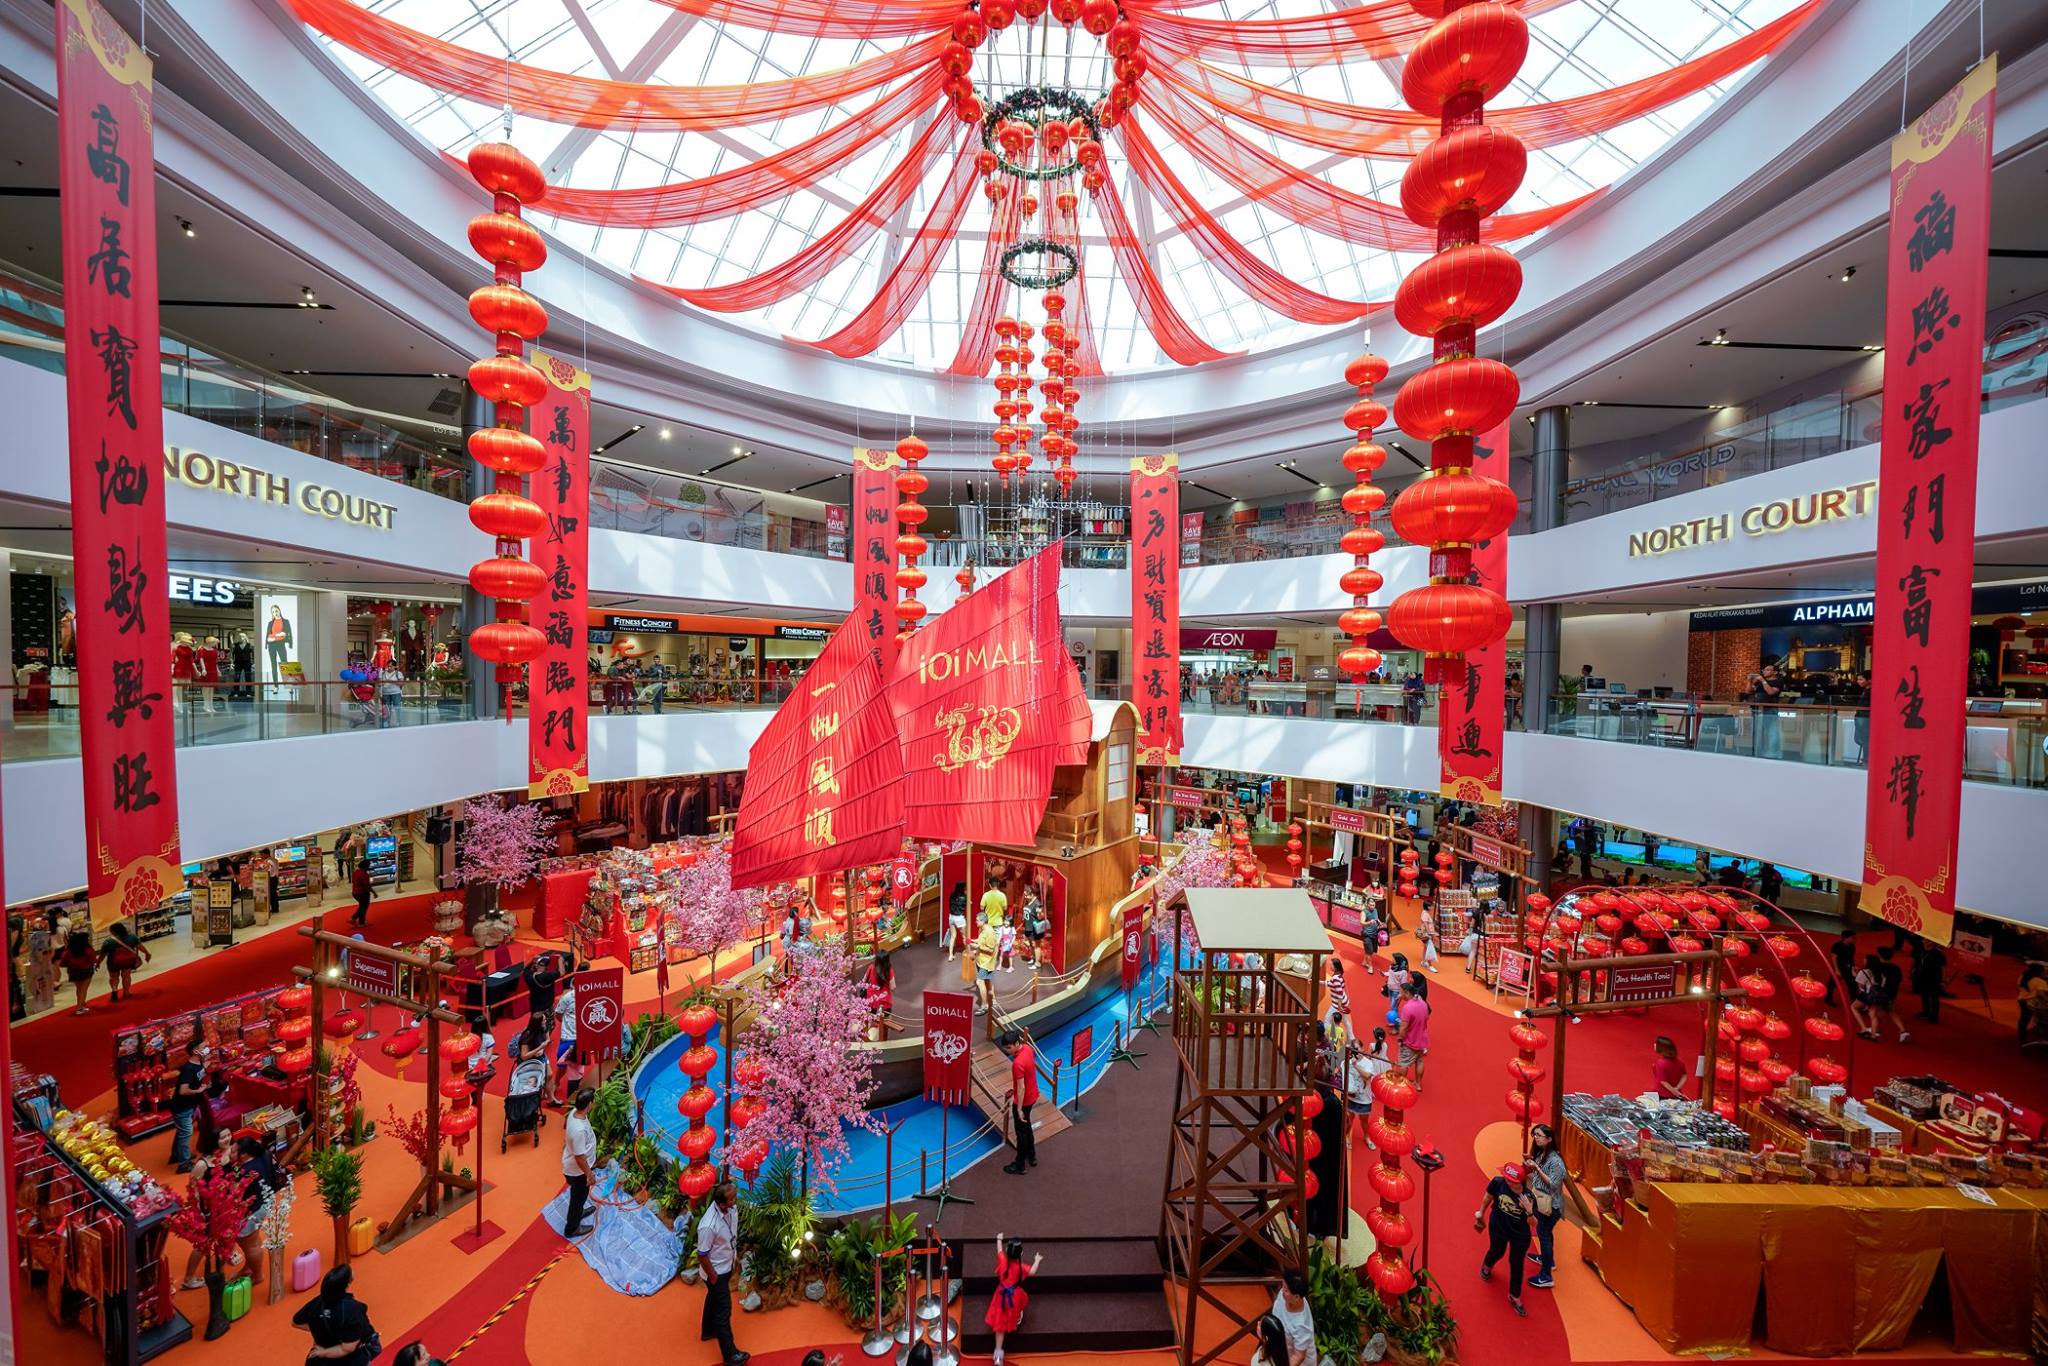 [PHOTOS] 28 Malls In Malaysia With The Most Impressive CNY Decorations